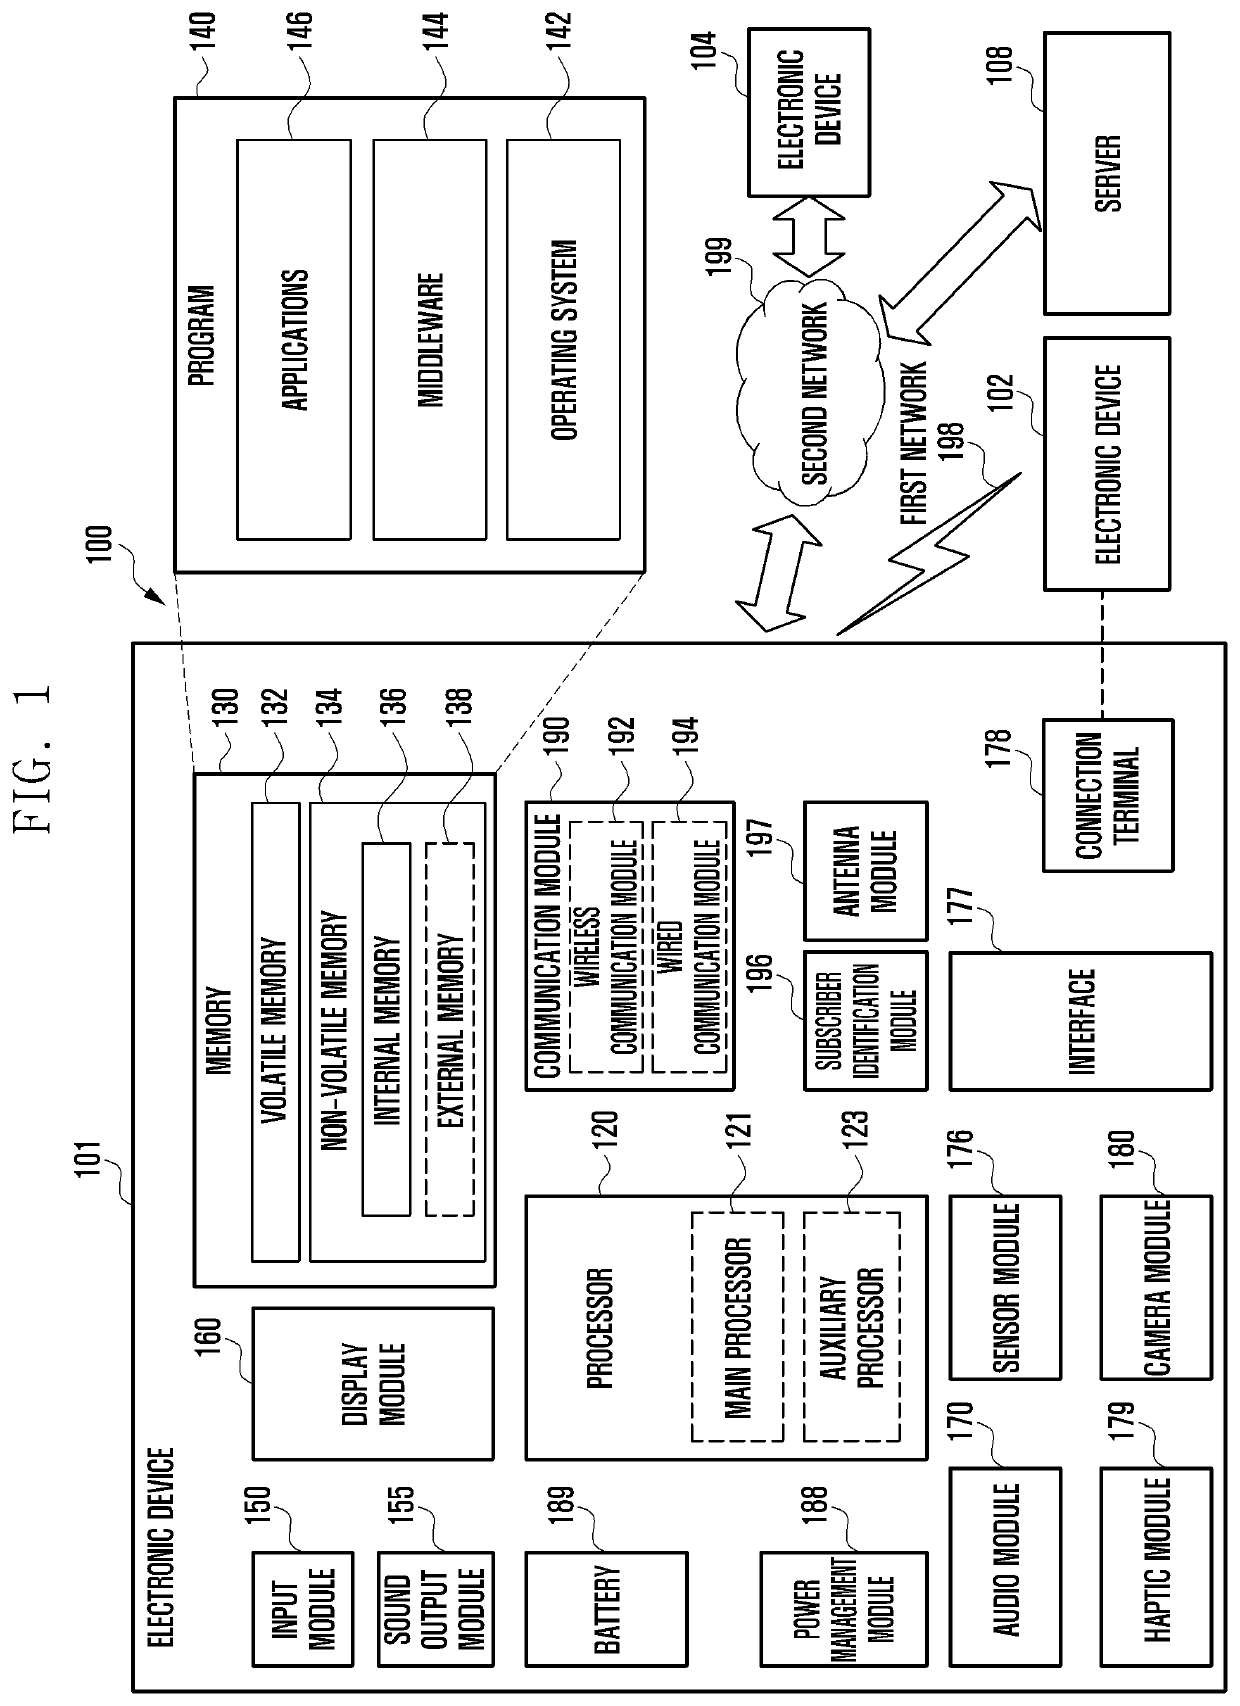 Flash lens of electronic device